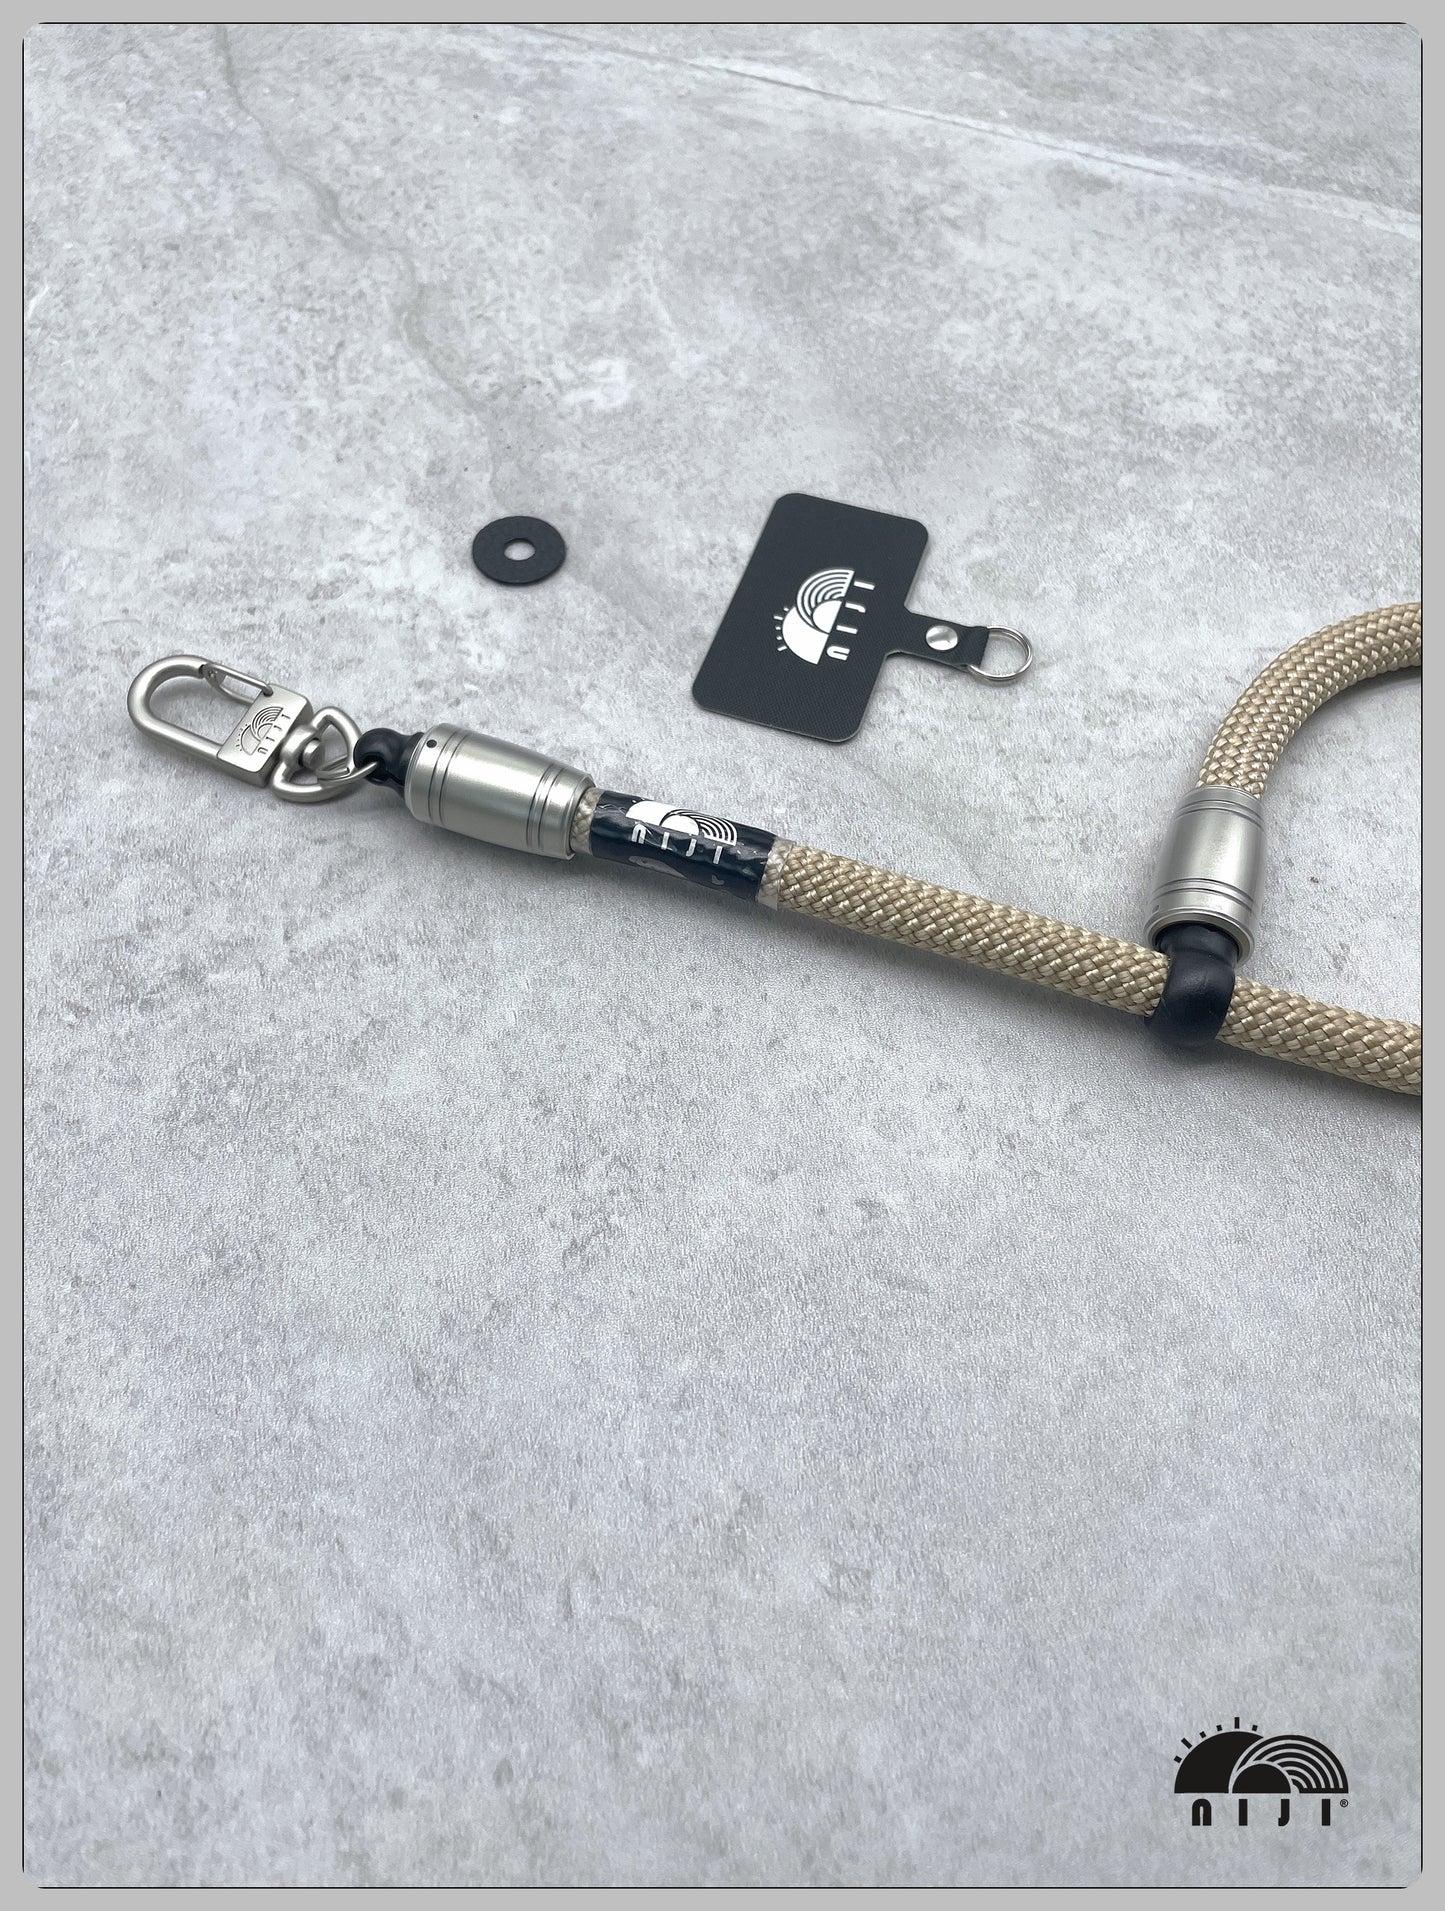 "NEW COLLECTION" 10mm camera / mobile wrist strap Beige color